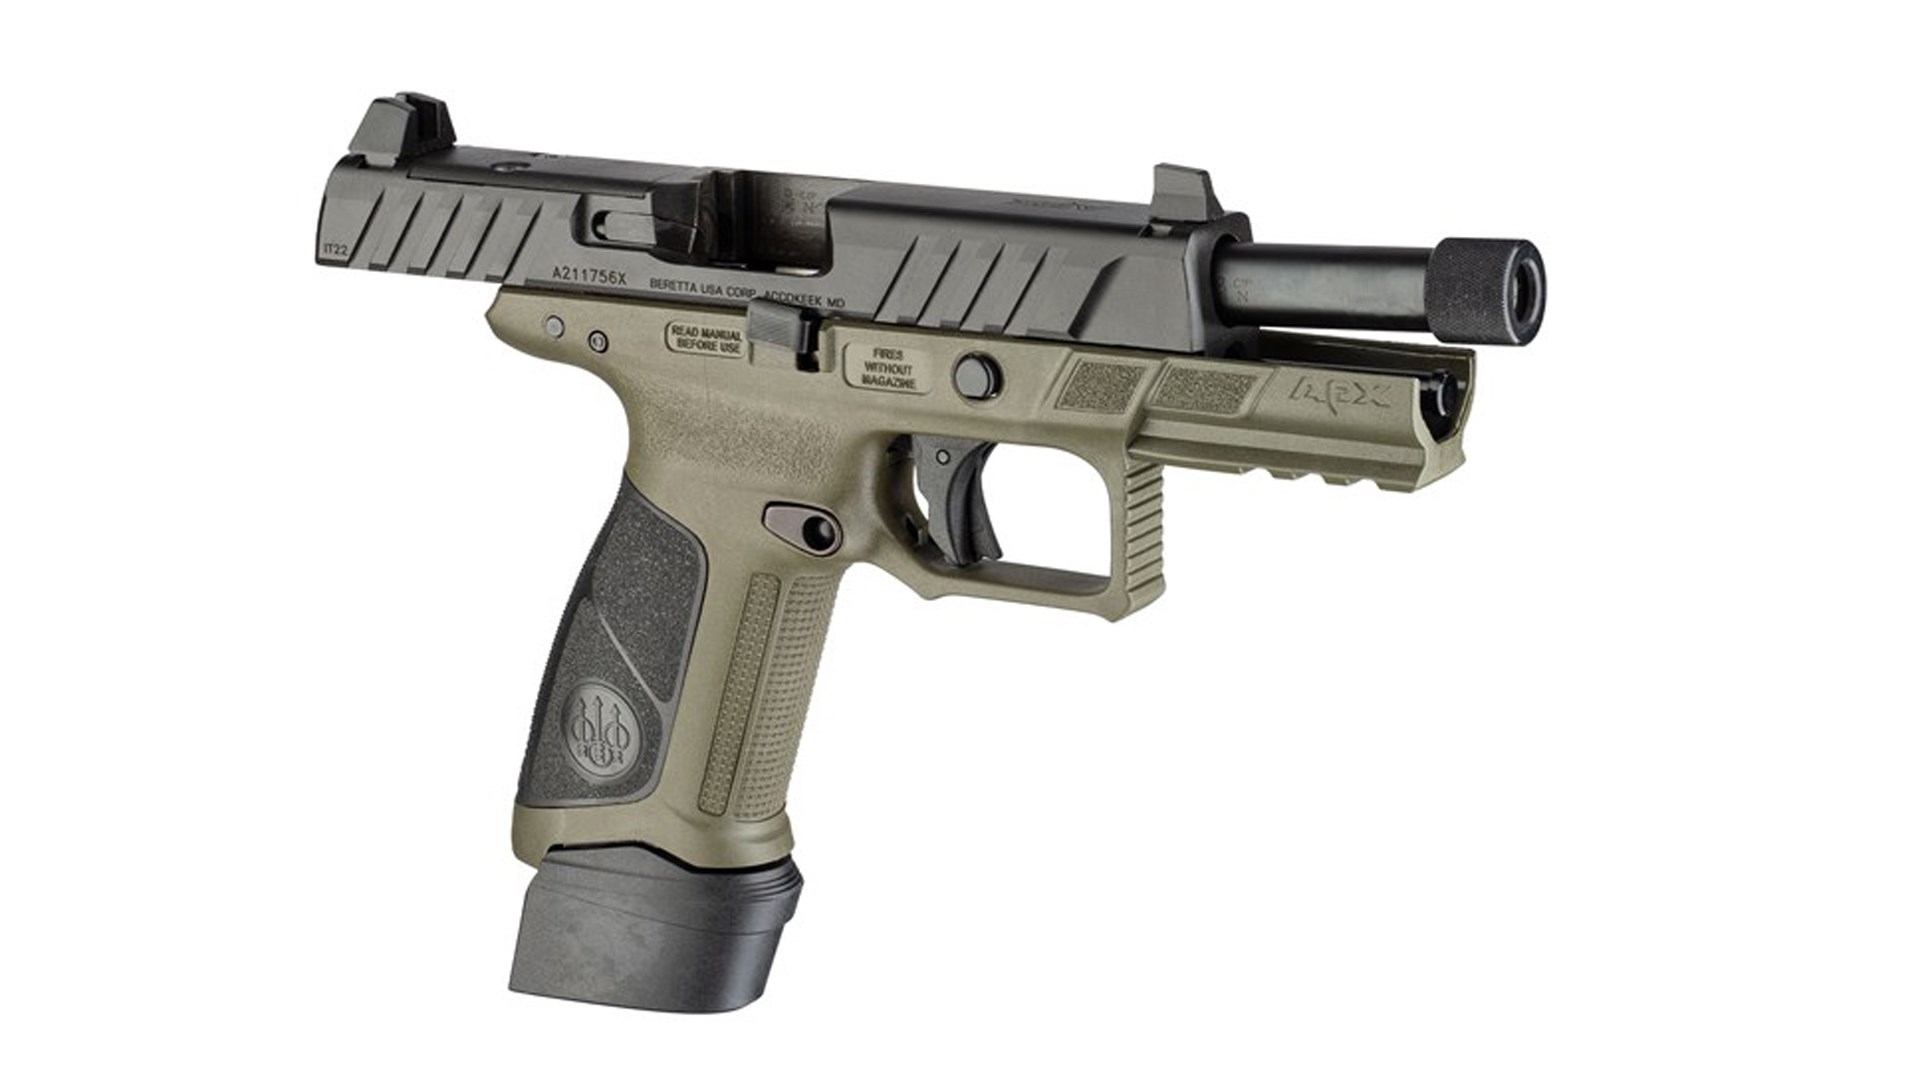 The right side of the Beretta APX A1 Tactical shown, with its slide locked back and an extended magazine installed.